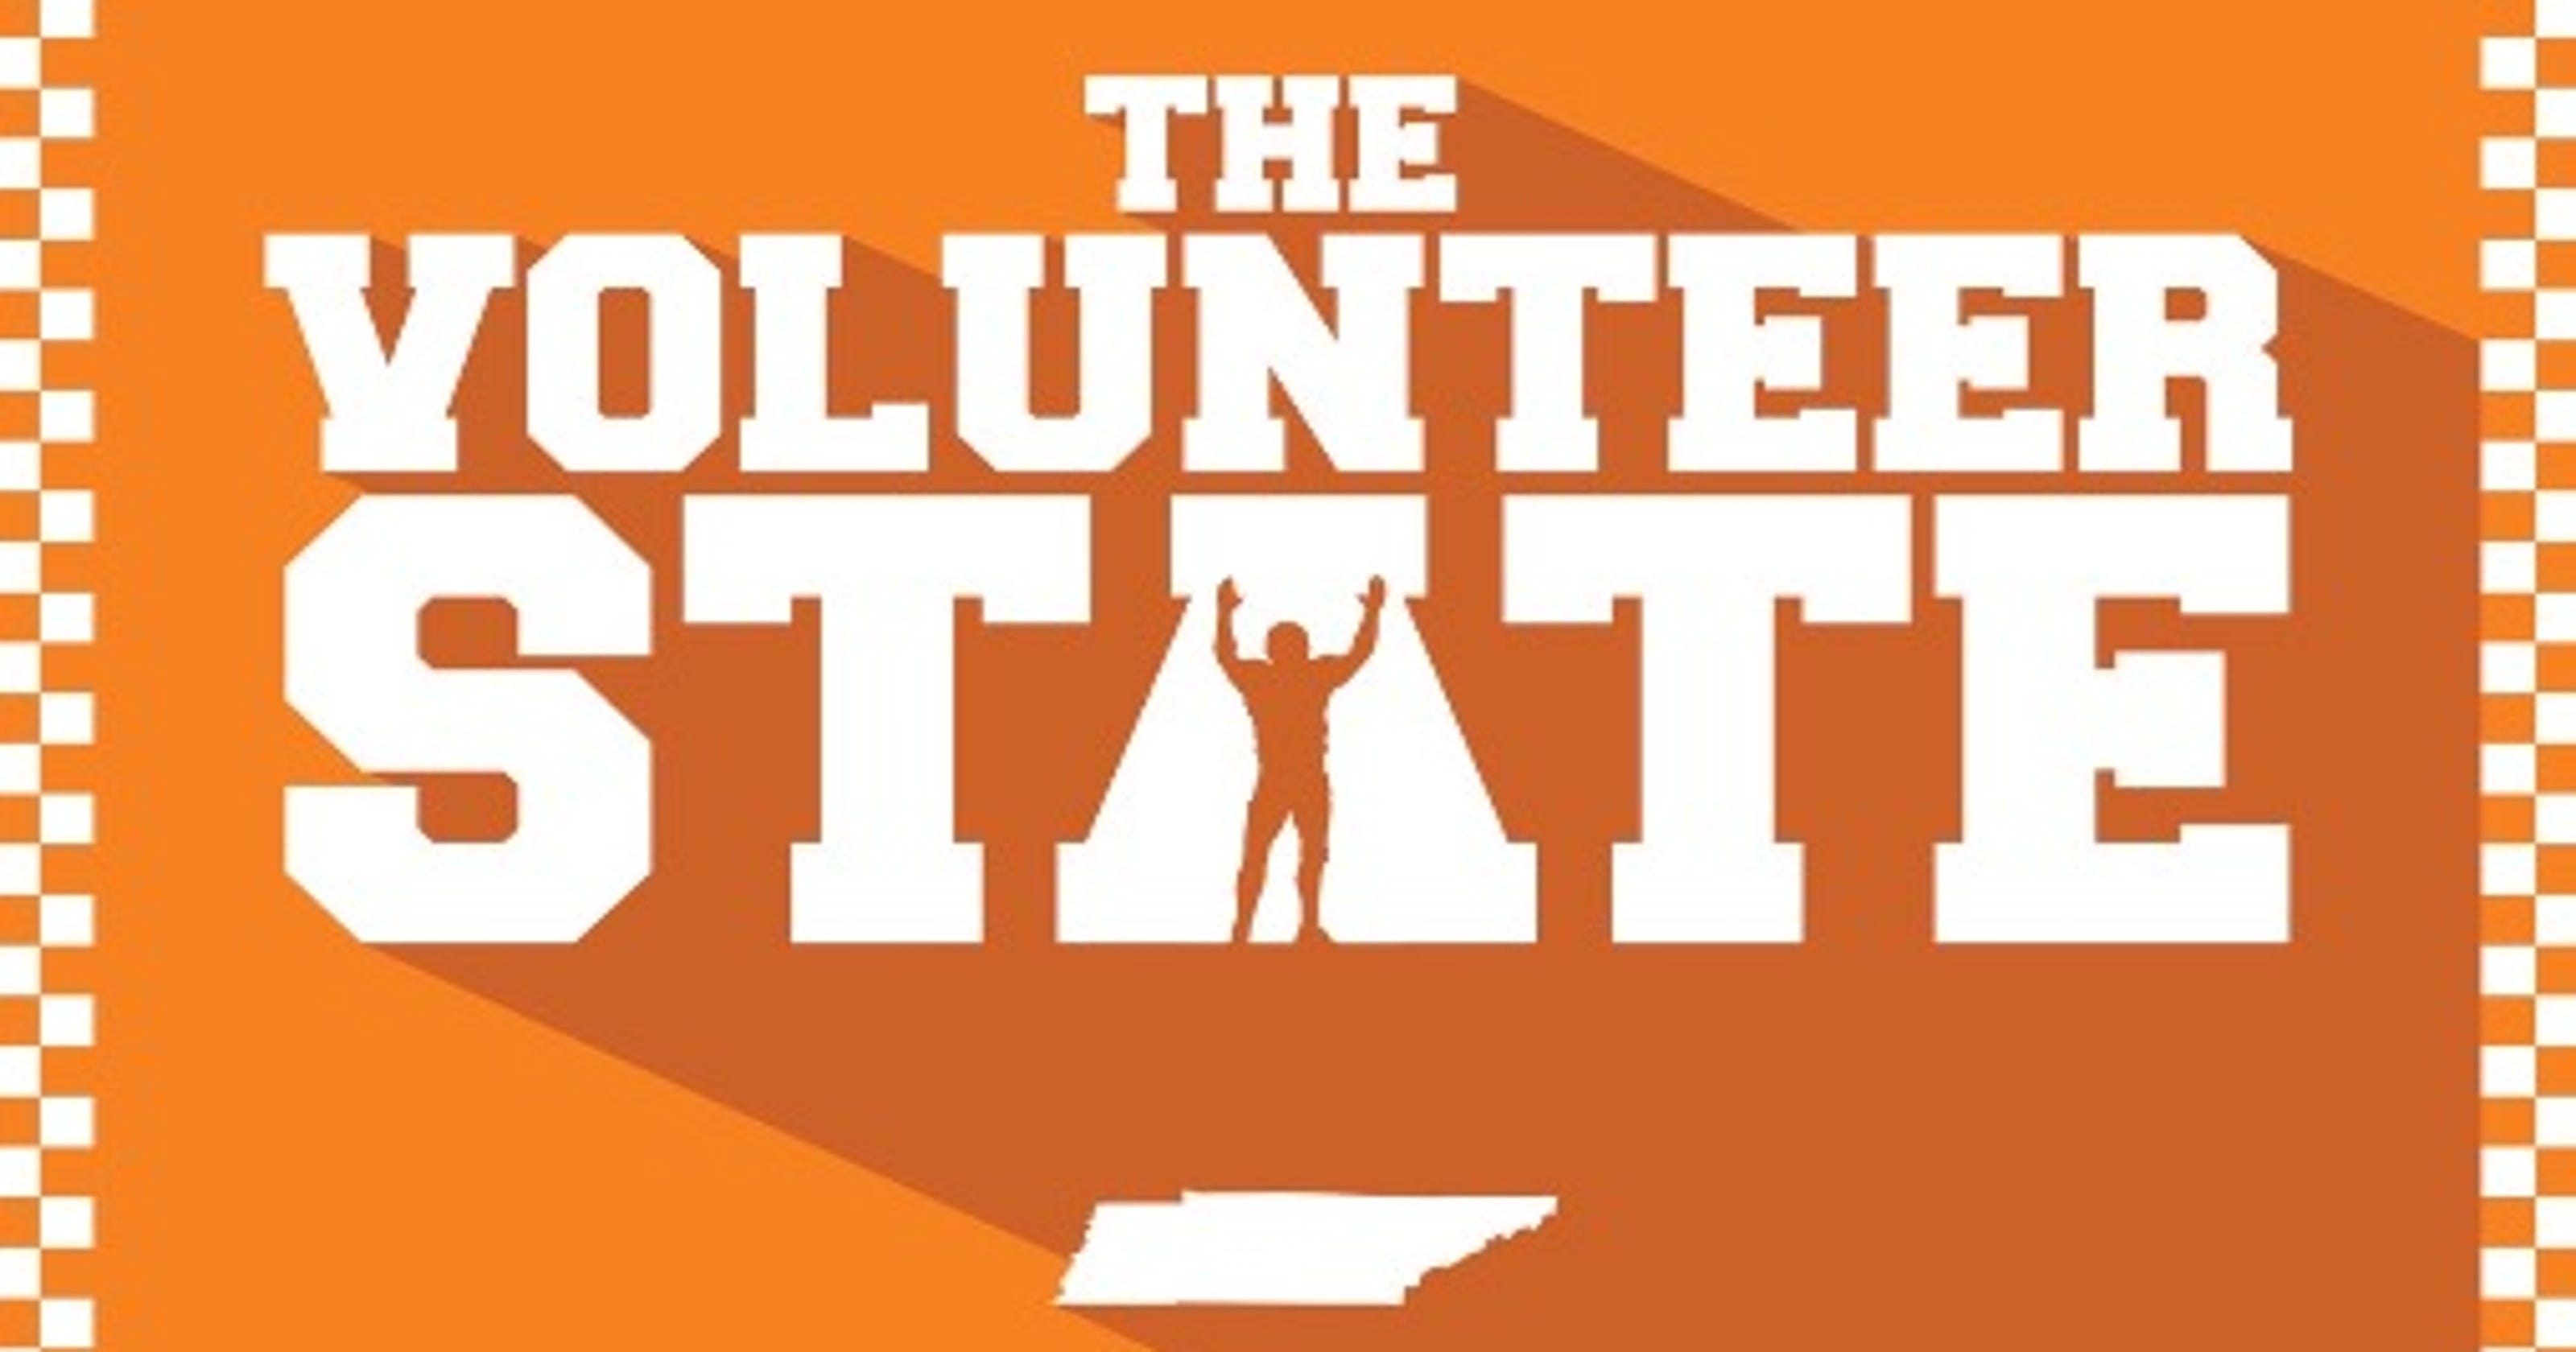 Tennessee Vols podcast The Volunteer State New episode available